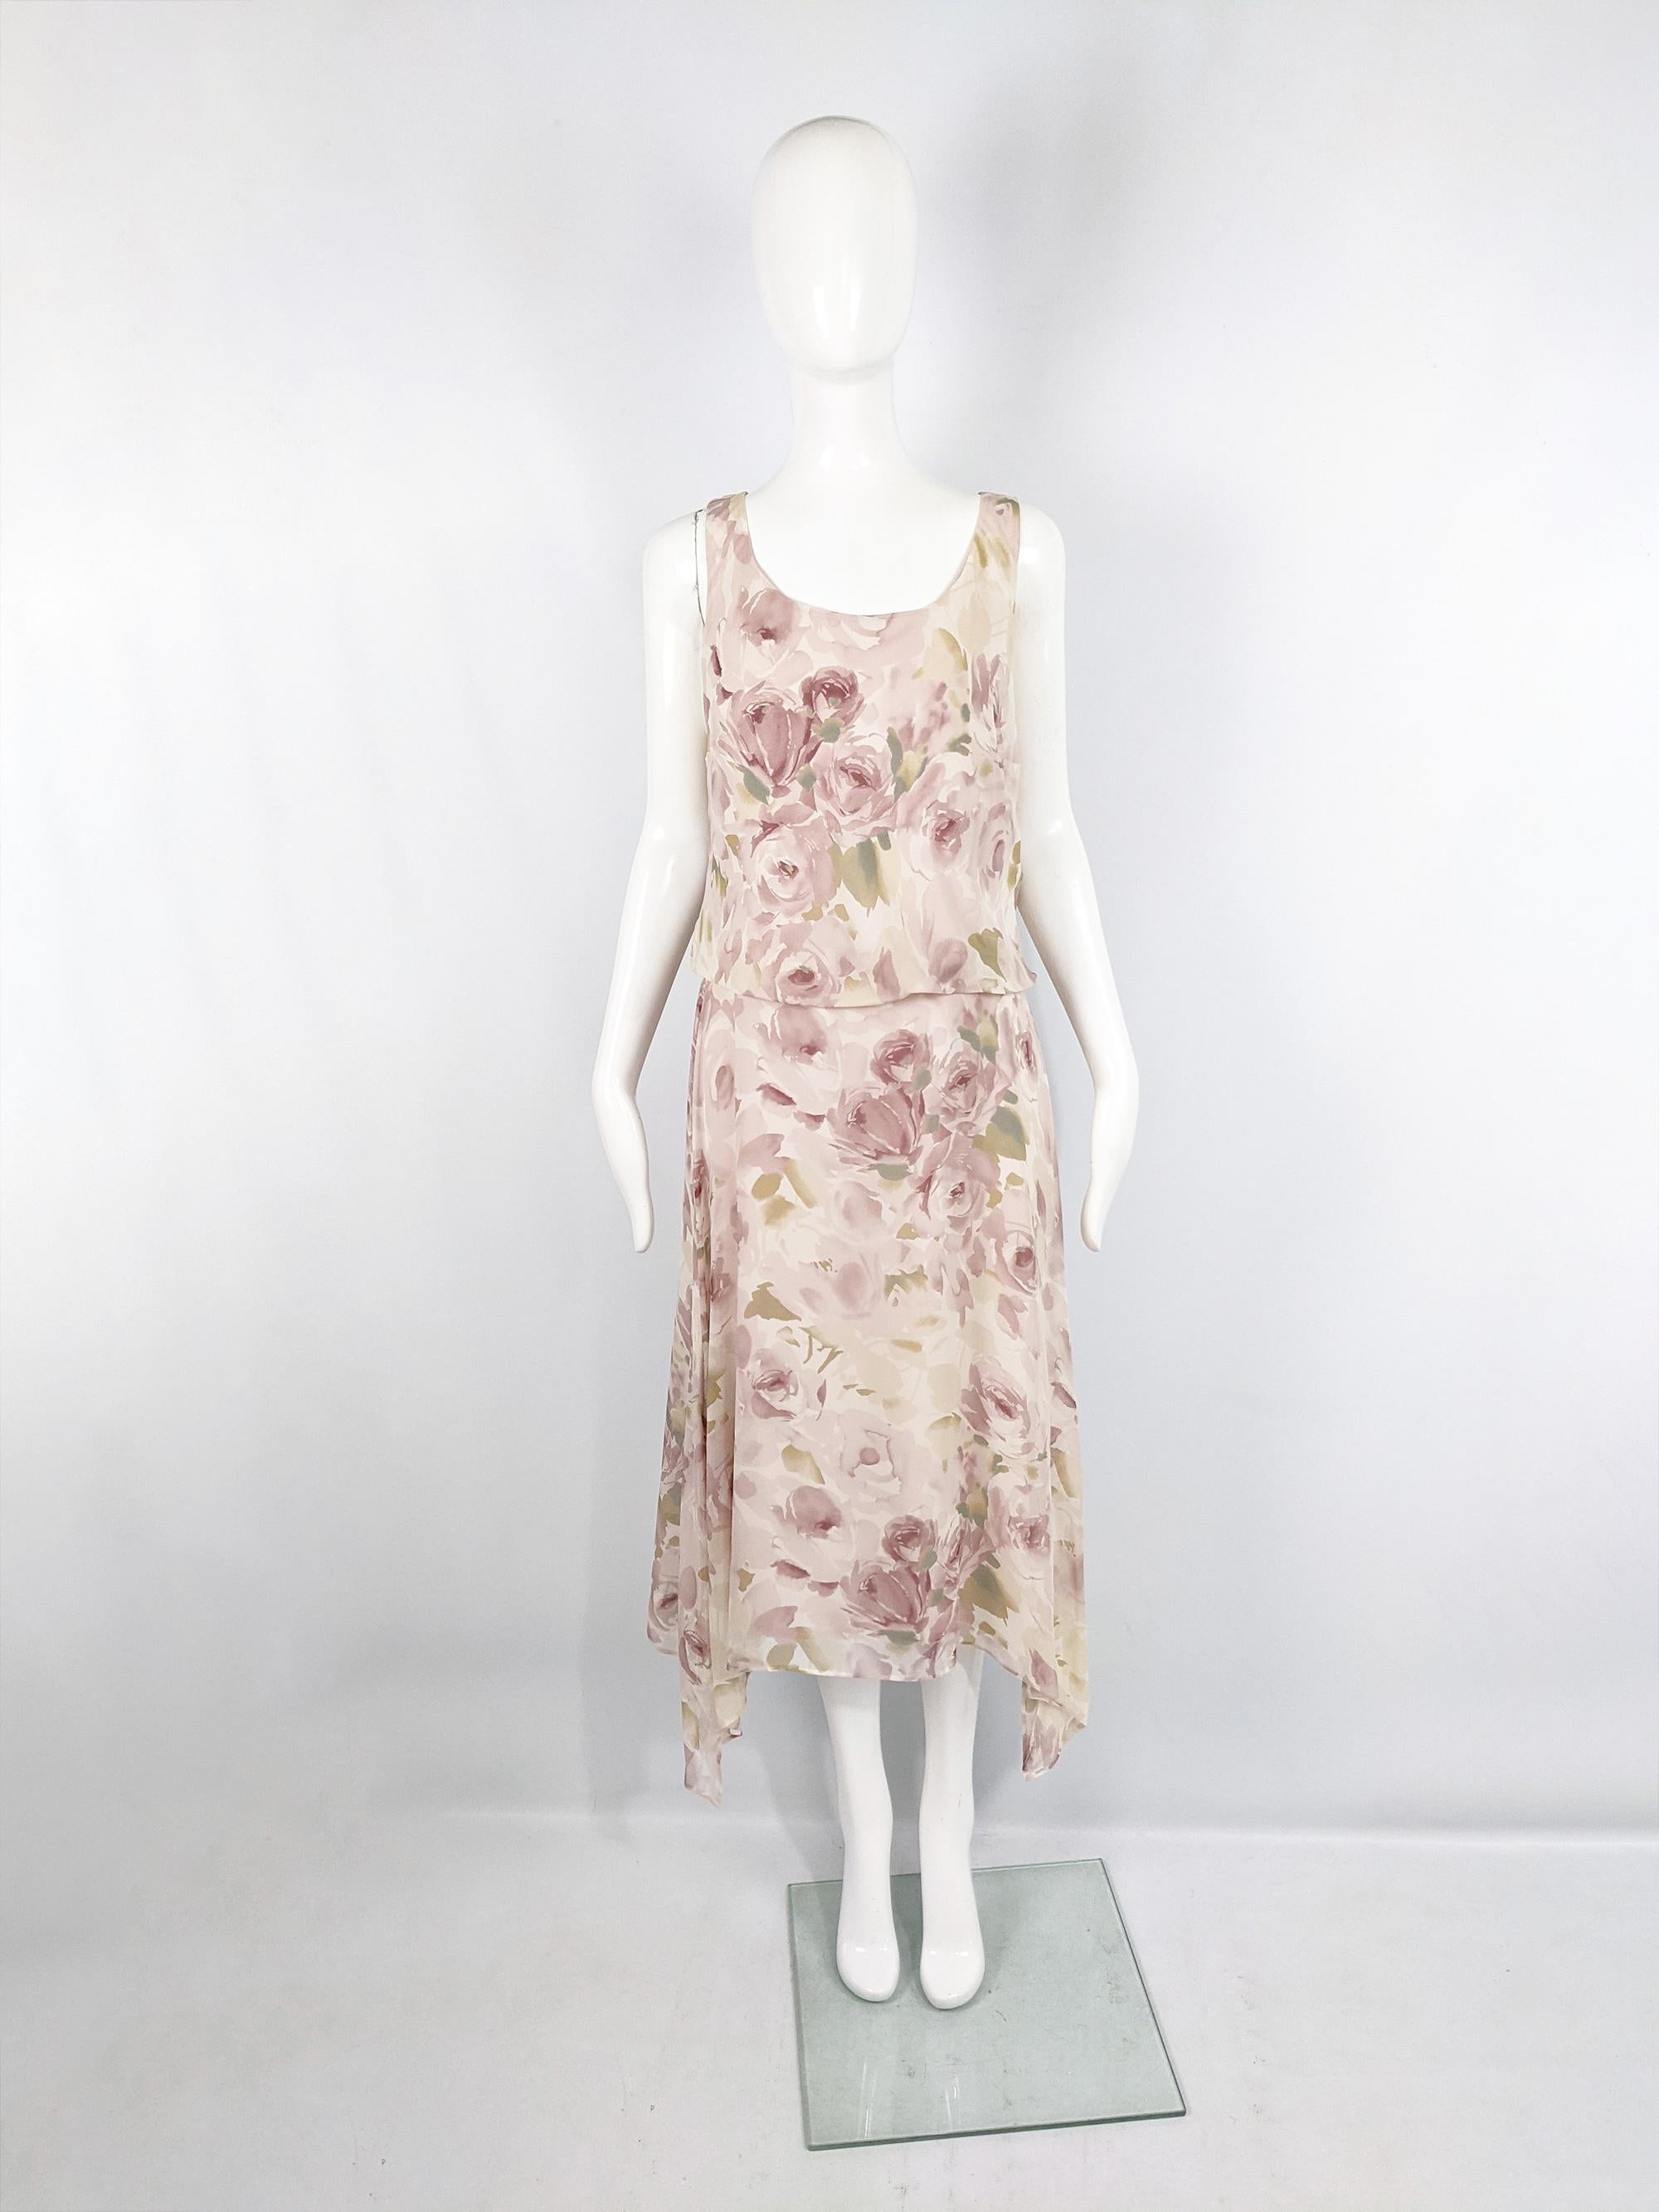 A pretty vintage dress from the 90s by luxury Italian fashion house, MaxMara. In a sheer, pastel pink floral print silk chiffon fabric. It has a loose blouson fit on top with a pointed skirt that is longer at the sides. Perfect for the day in spring